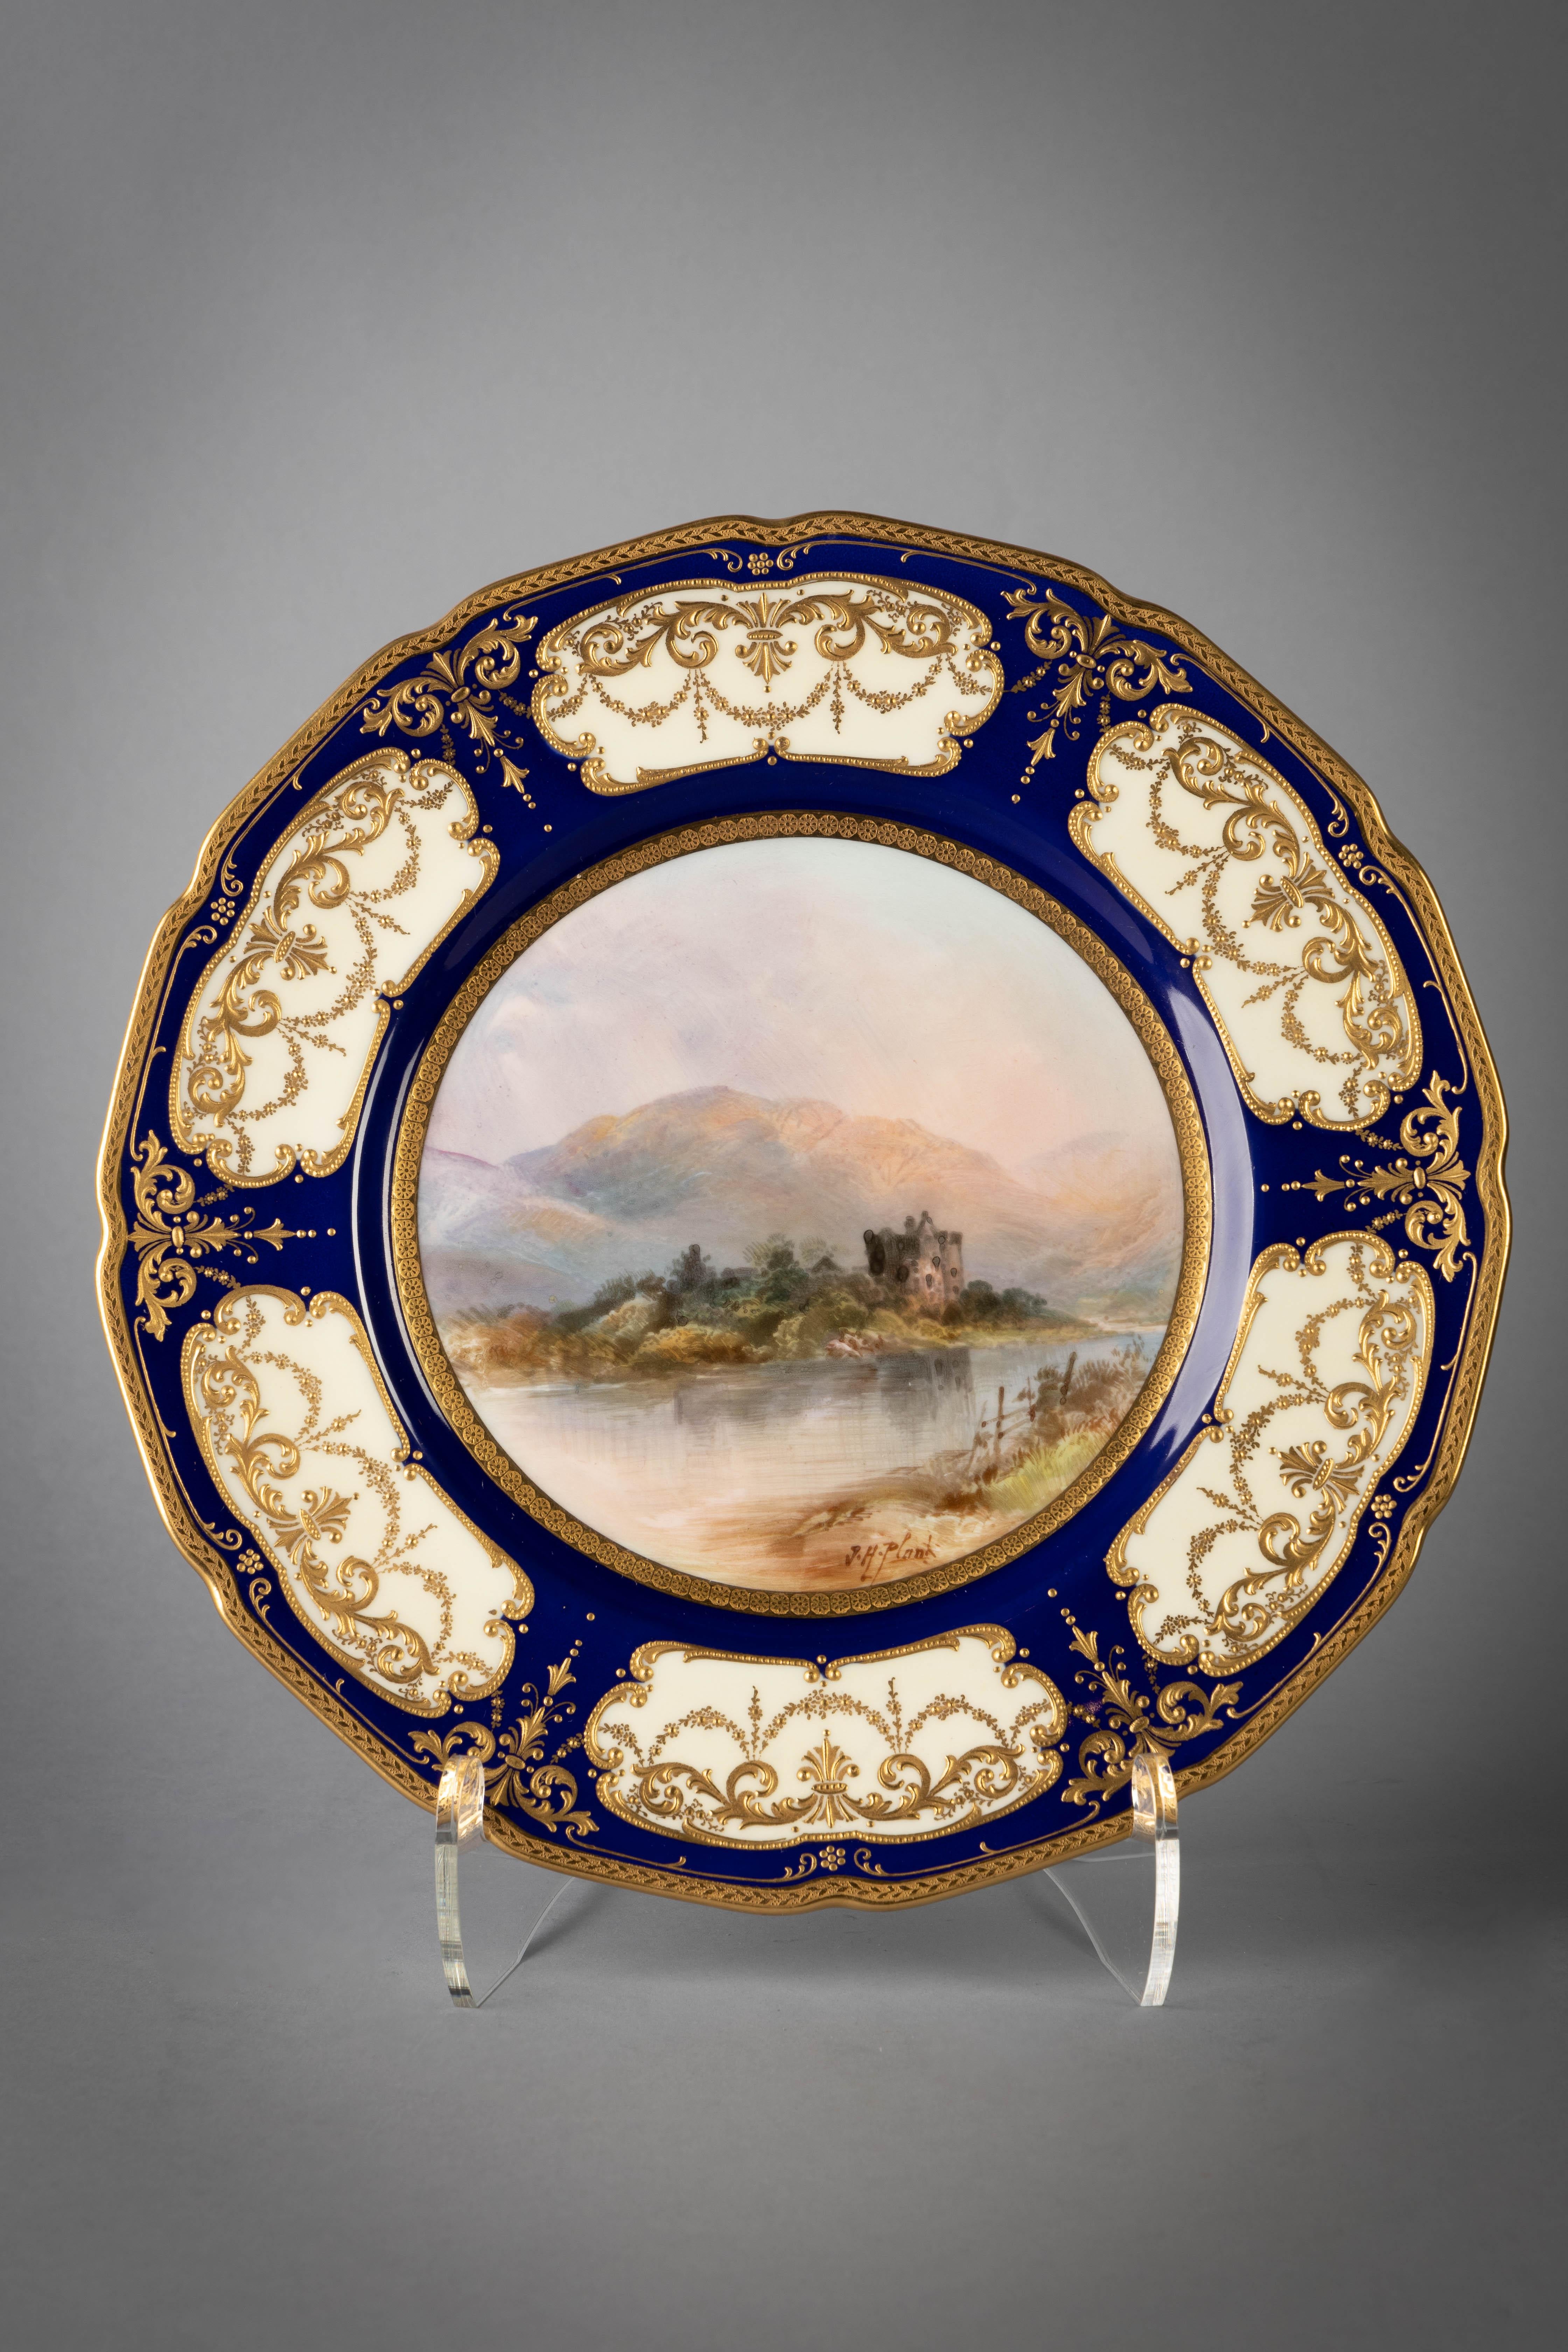 Cream ground with a wide cobalt border decorated with raised gold foliage to shaped cartouches revealing the cream body, polychrome enamel decorated centers titled on the reverse. Signed J.H. Plant.